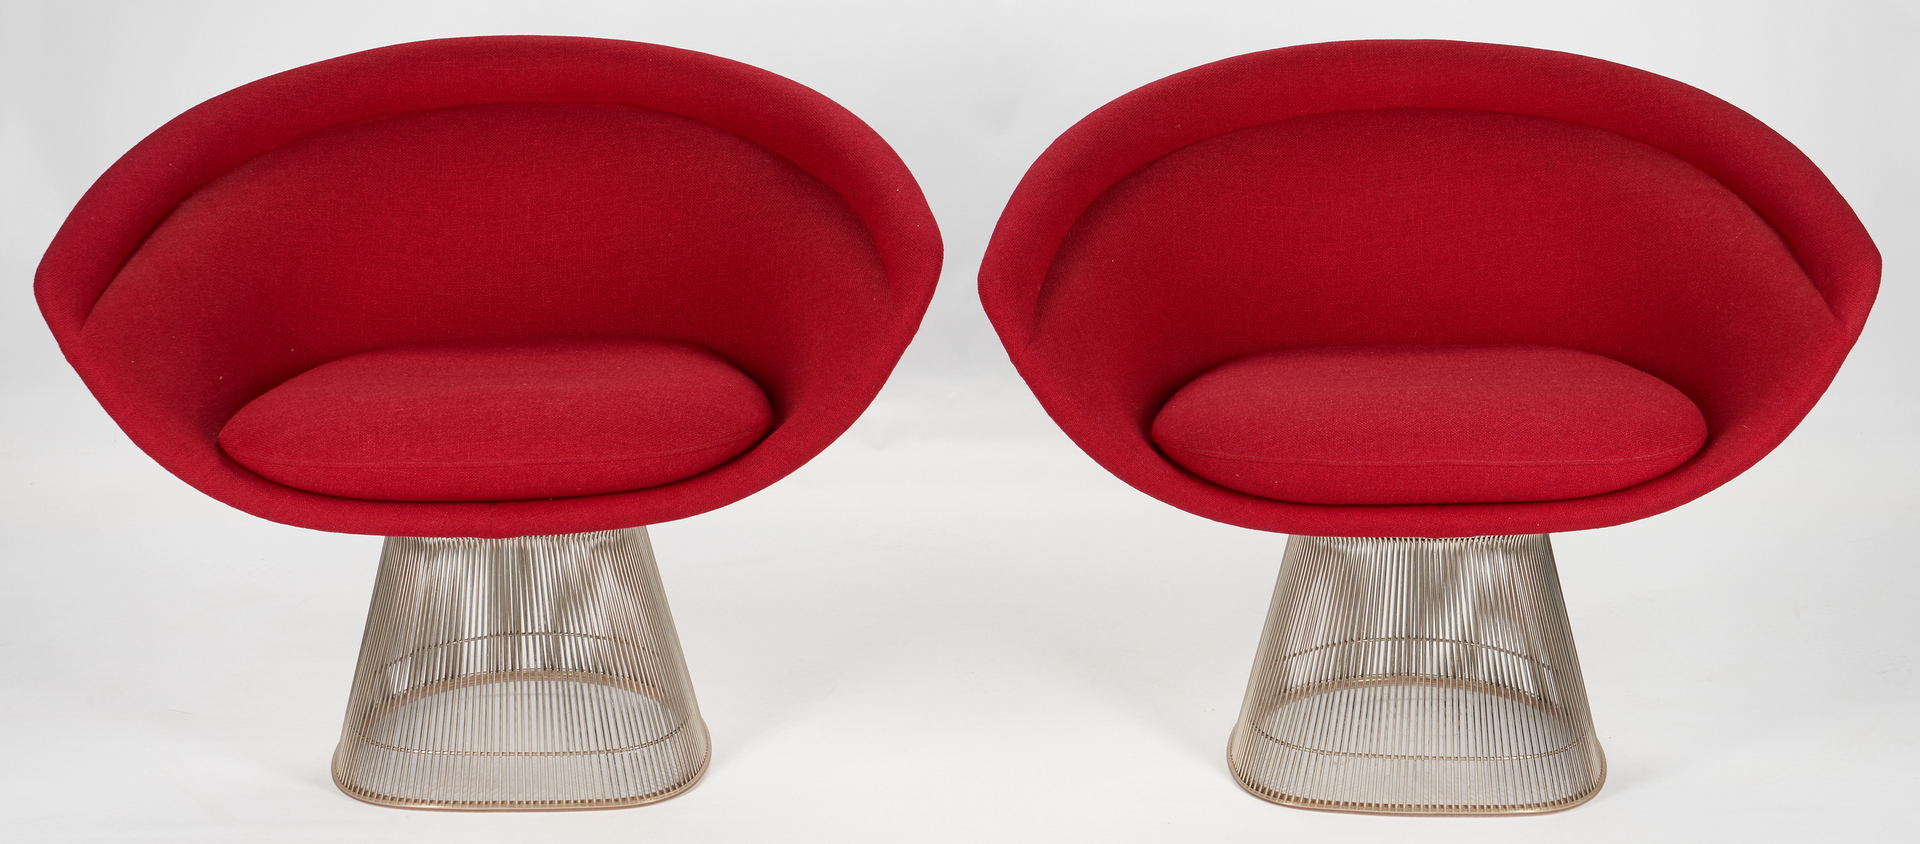 Lot 590: 4 Warren Platner for Knoll Lounge Chairs